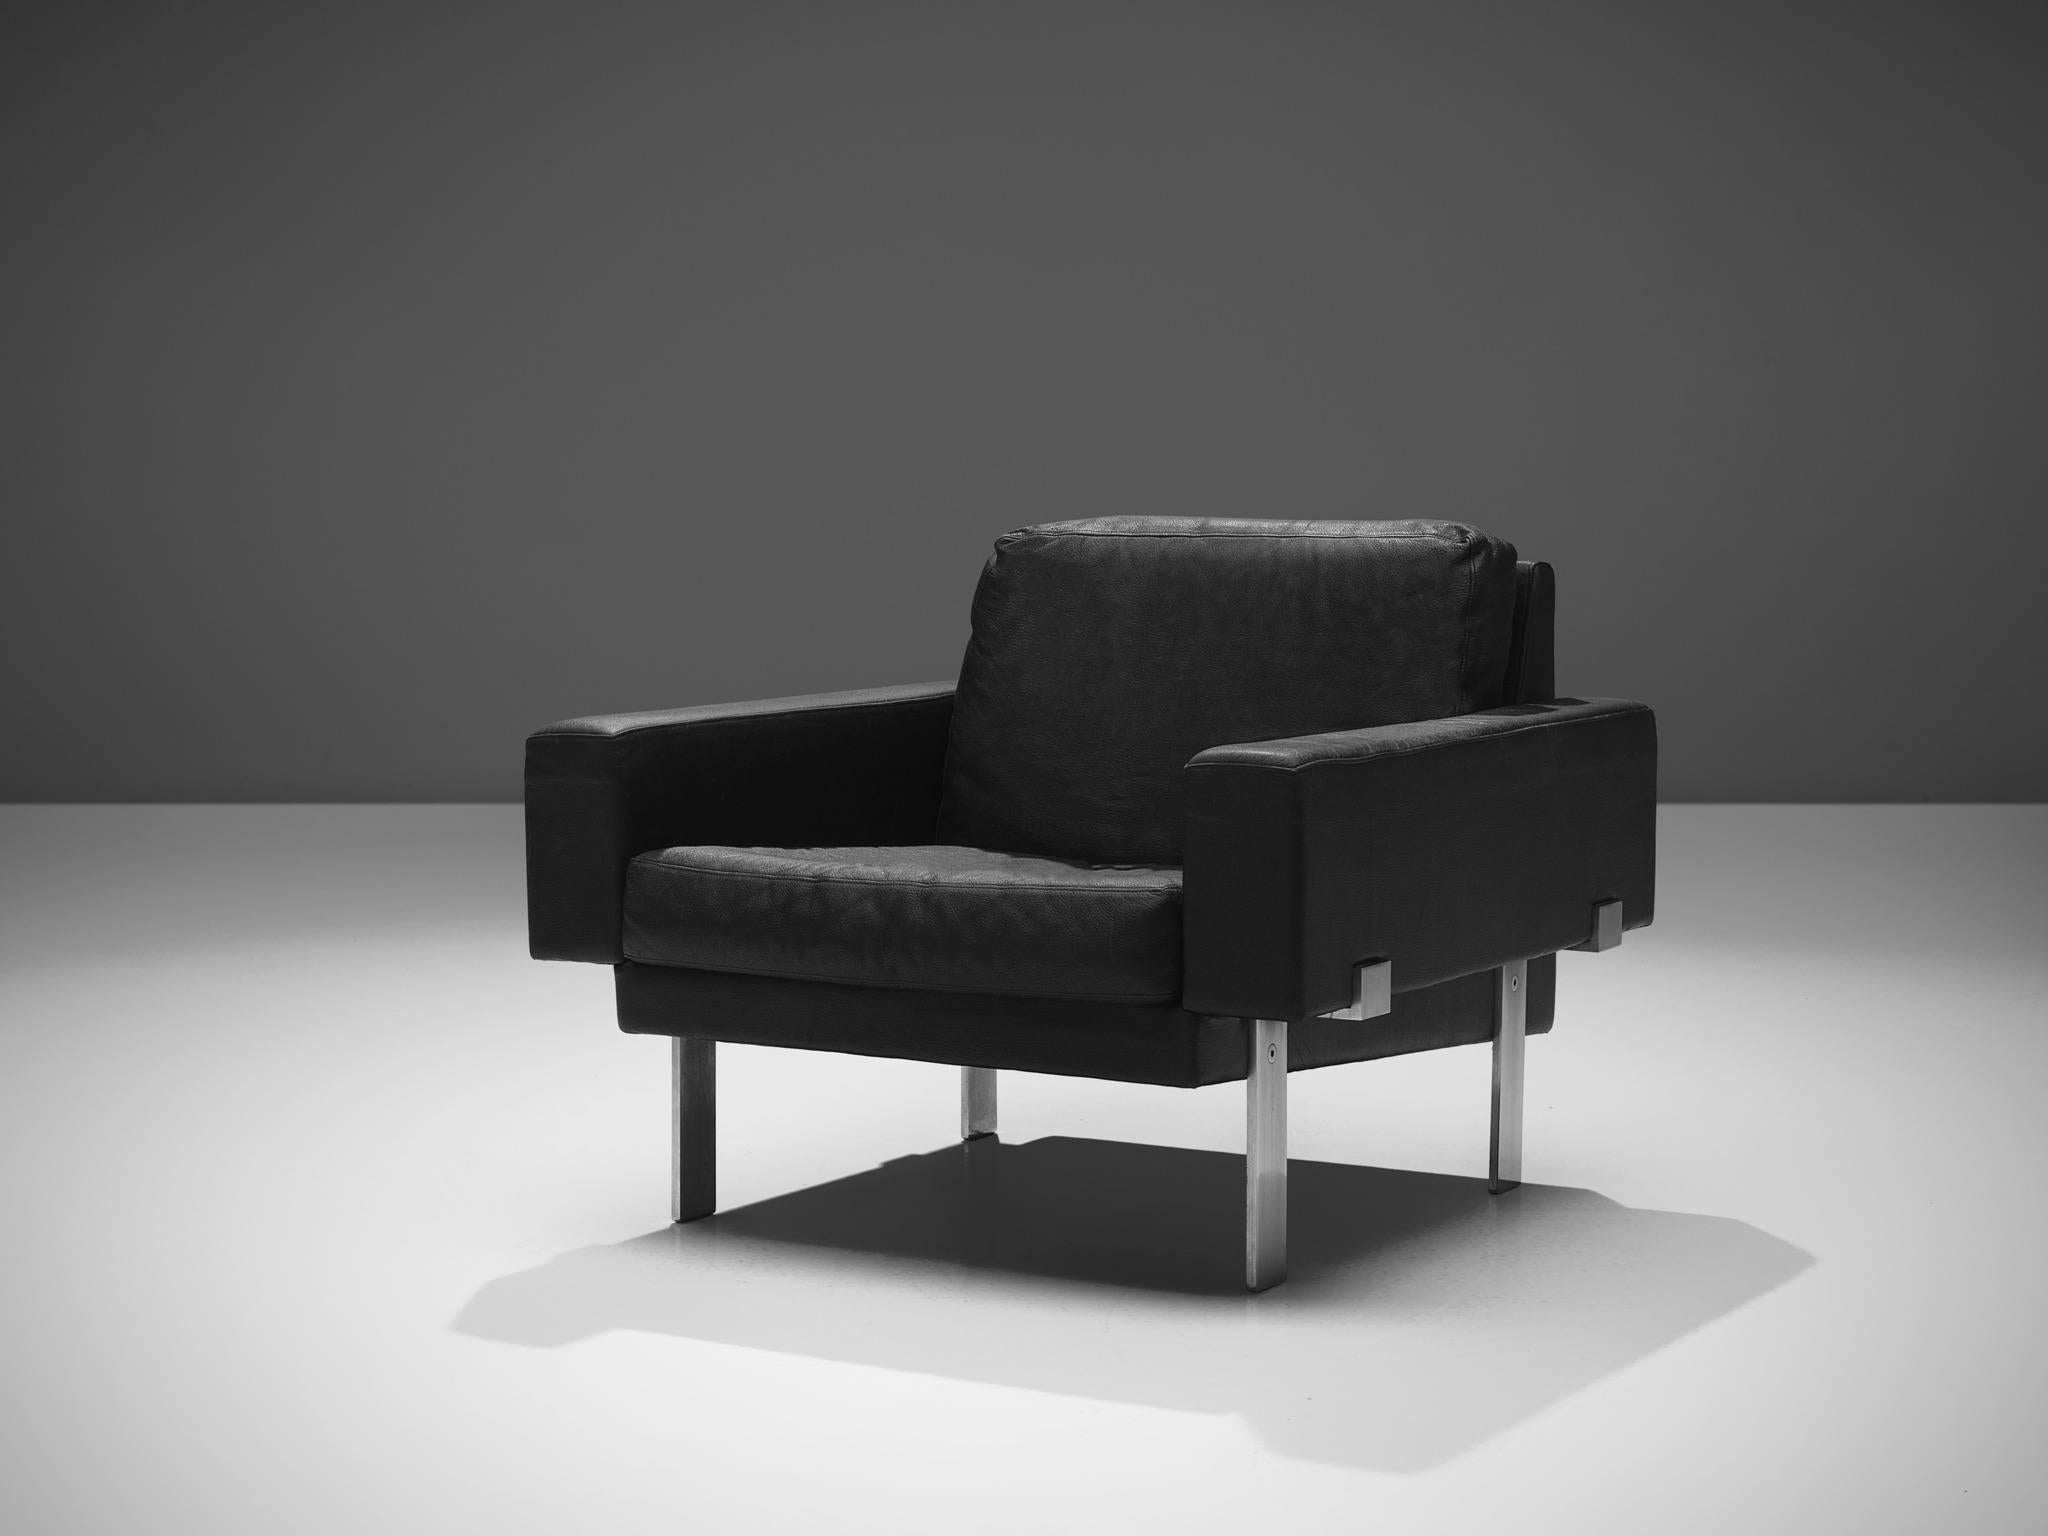 Illum Wikkelsø by Mikael Laursen, armchair model ML 230, steel, Denmark, 1960s

This set is executed in with thick black leather and steel. The seat and back are smoothly upholstered and complement the steel frame wonderfully. The straight flat